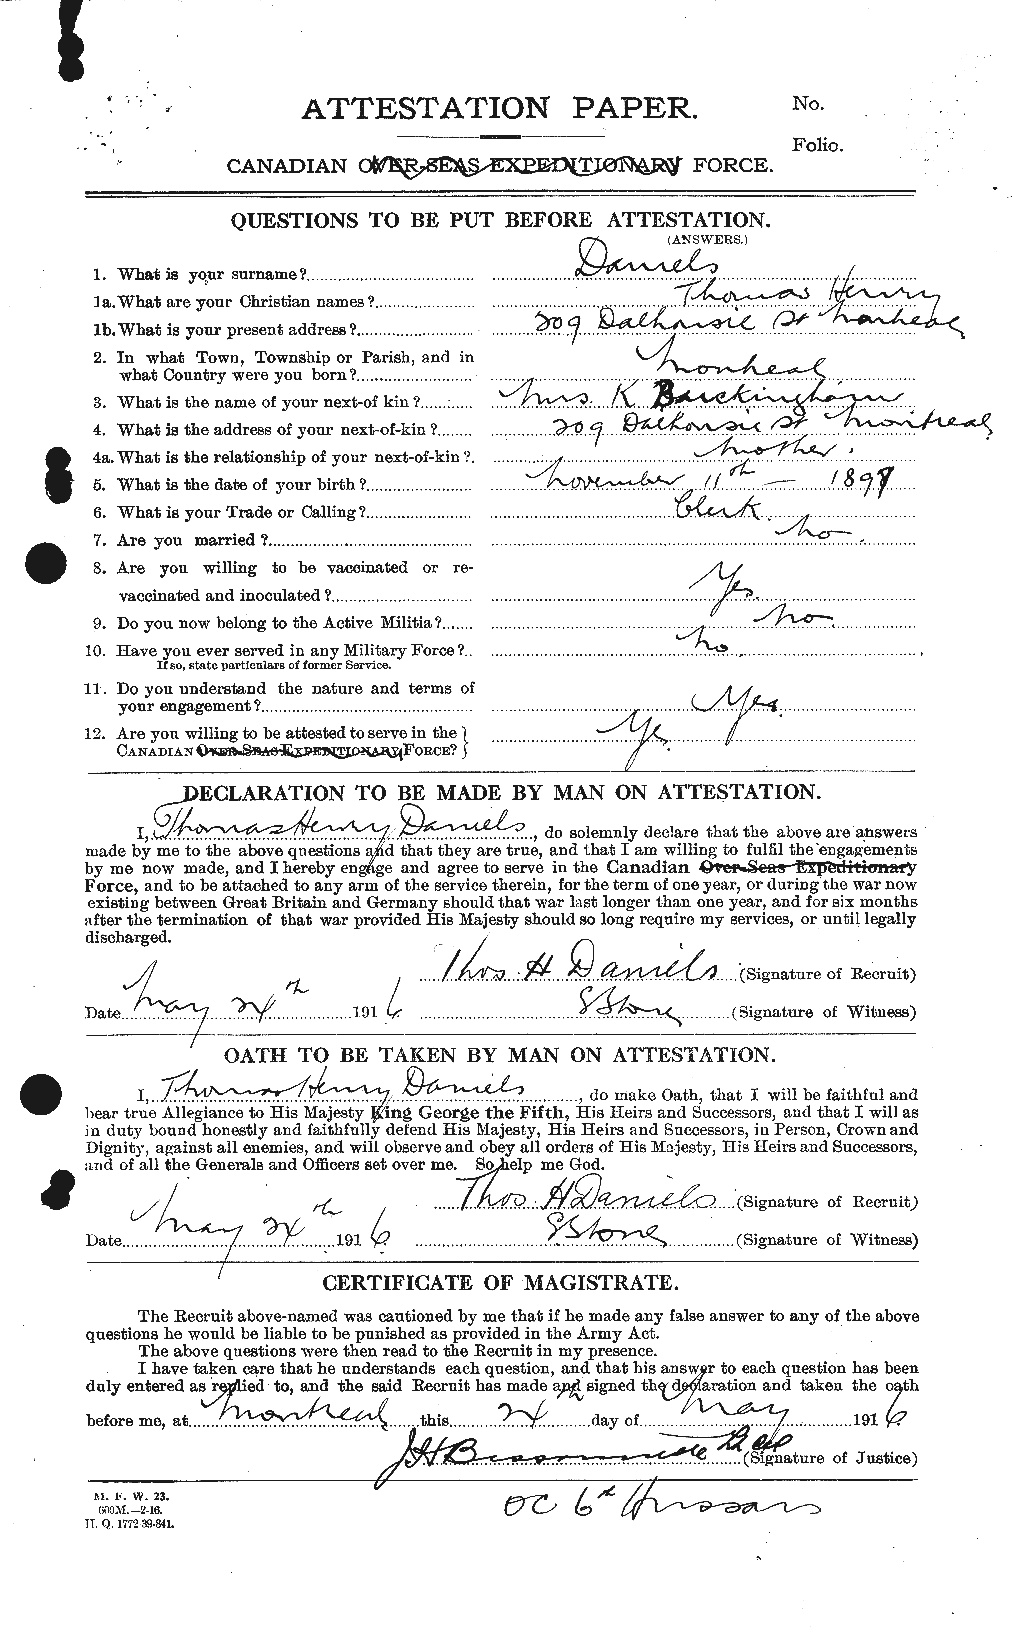 Personnel Records of the First World War - CEF 279678a